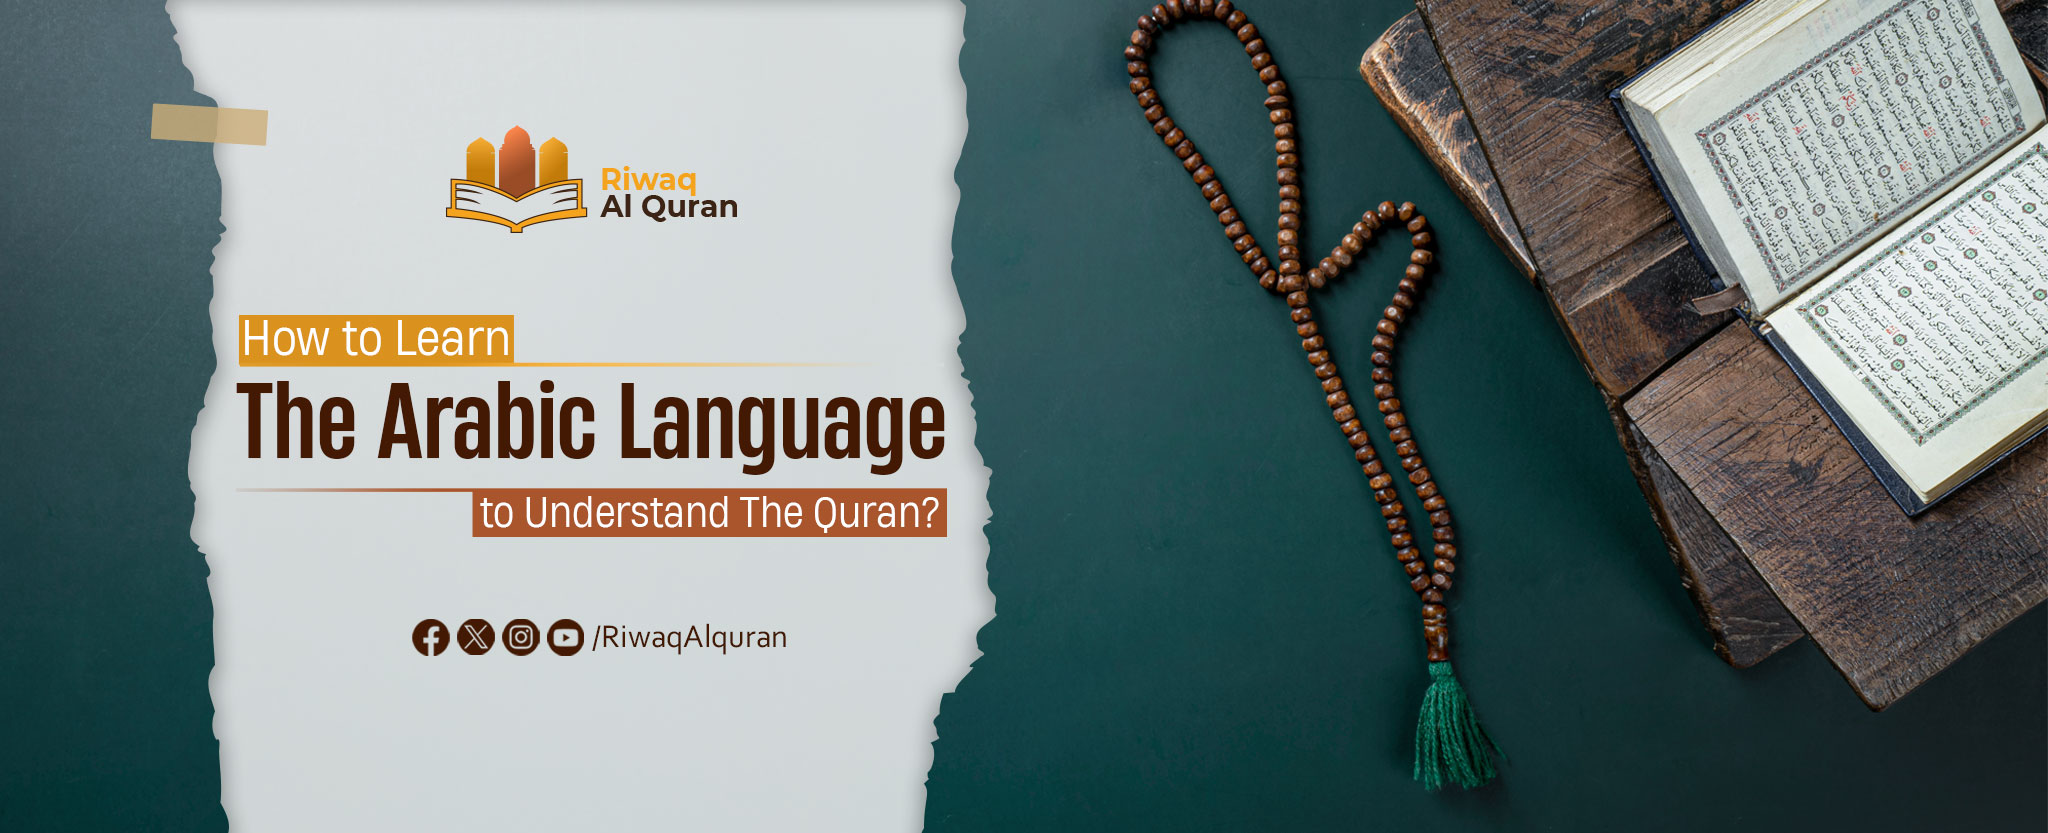 How to Learn the Arabic Language to Understand The Quran?